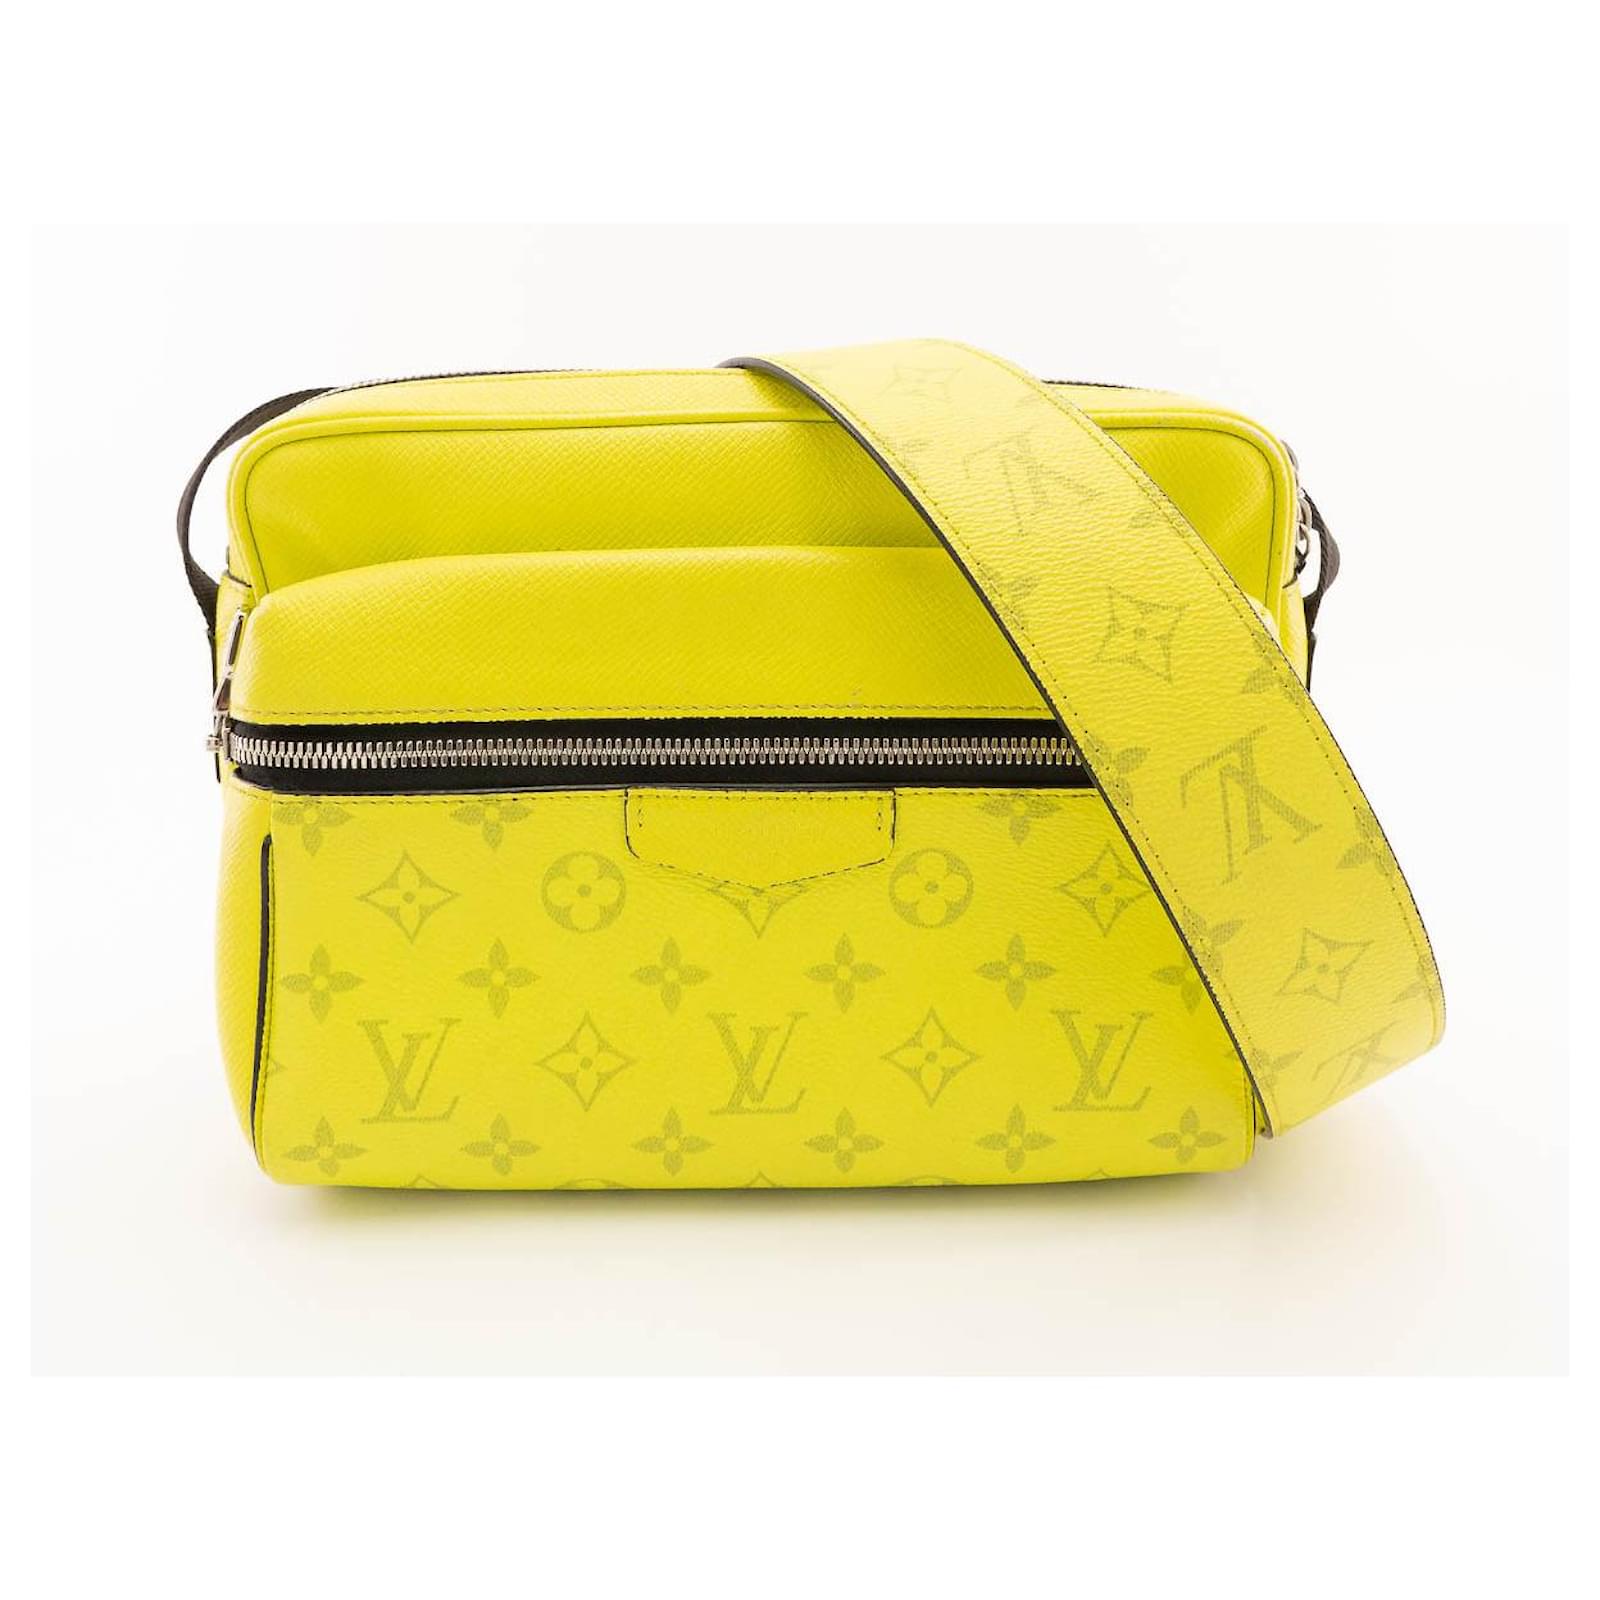 Louis Vuitton Loop Bag Bright Yellow - Fablle